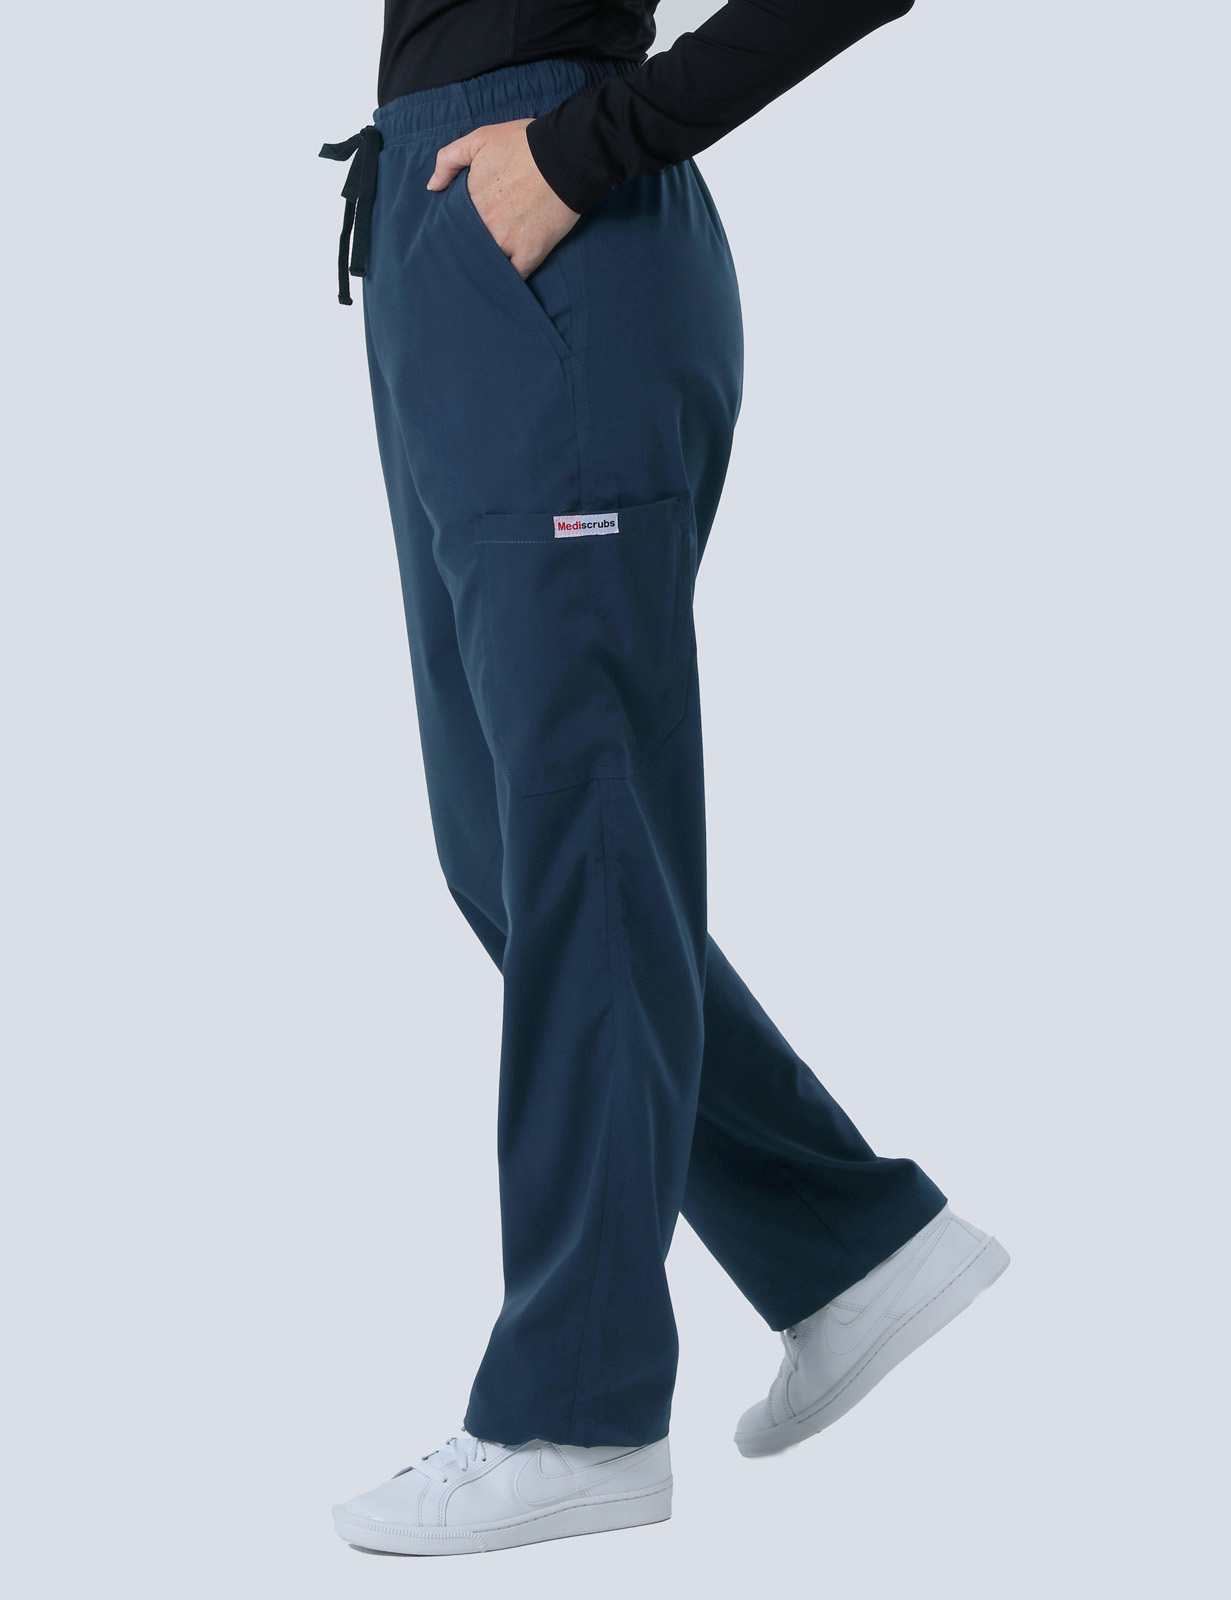 Melbourne Hospital - RN (Women's Fit Spandex Scrub Top and Cargo Pants in Navy incl Logos)